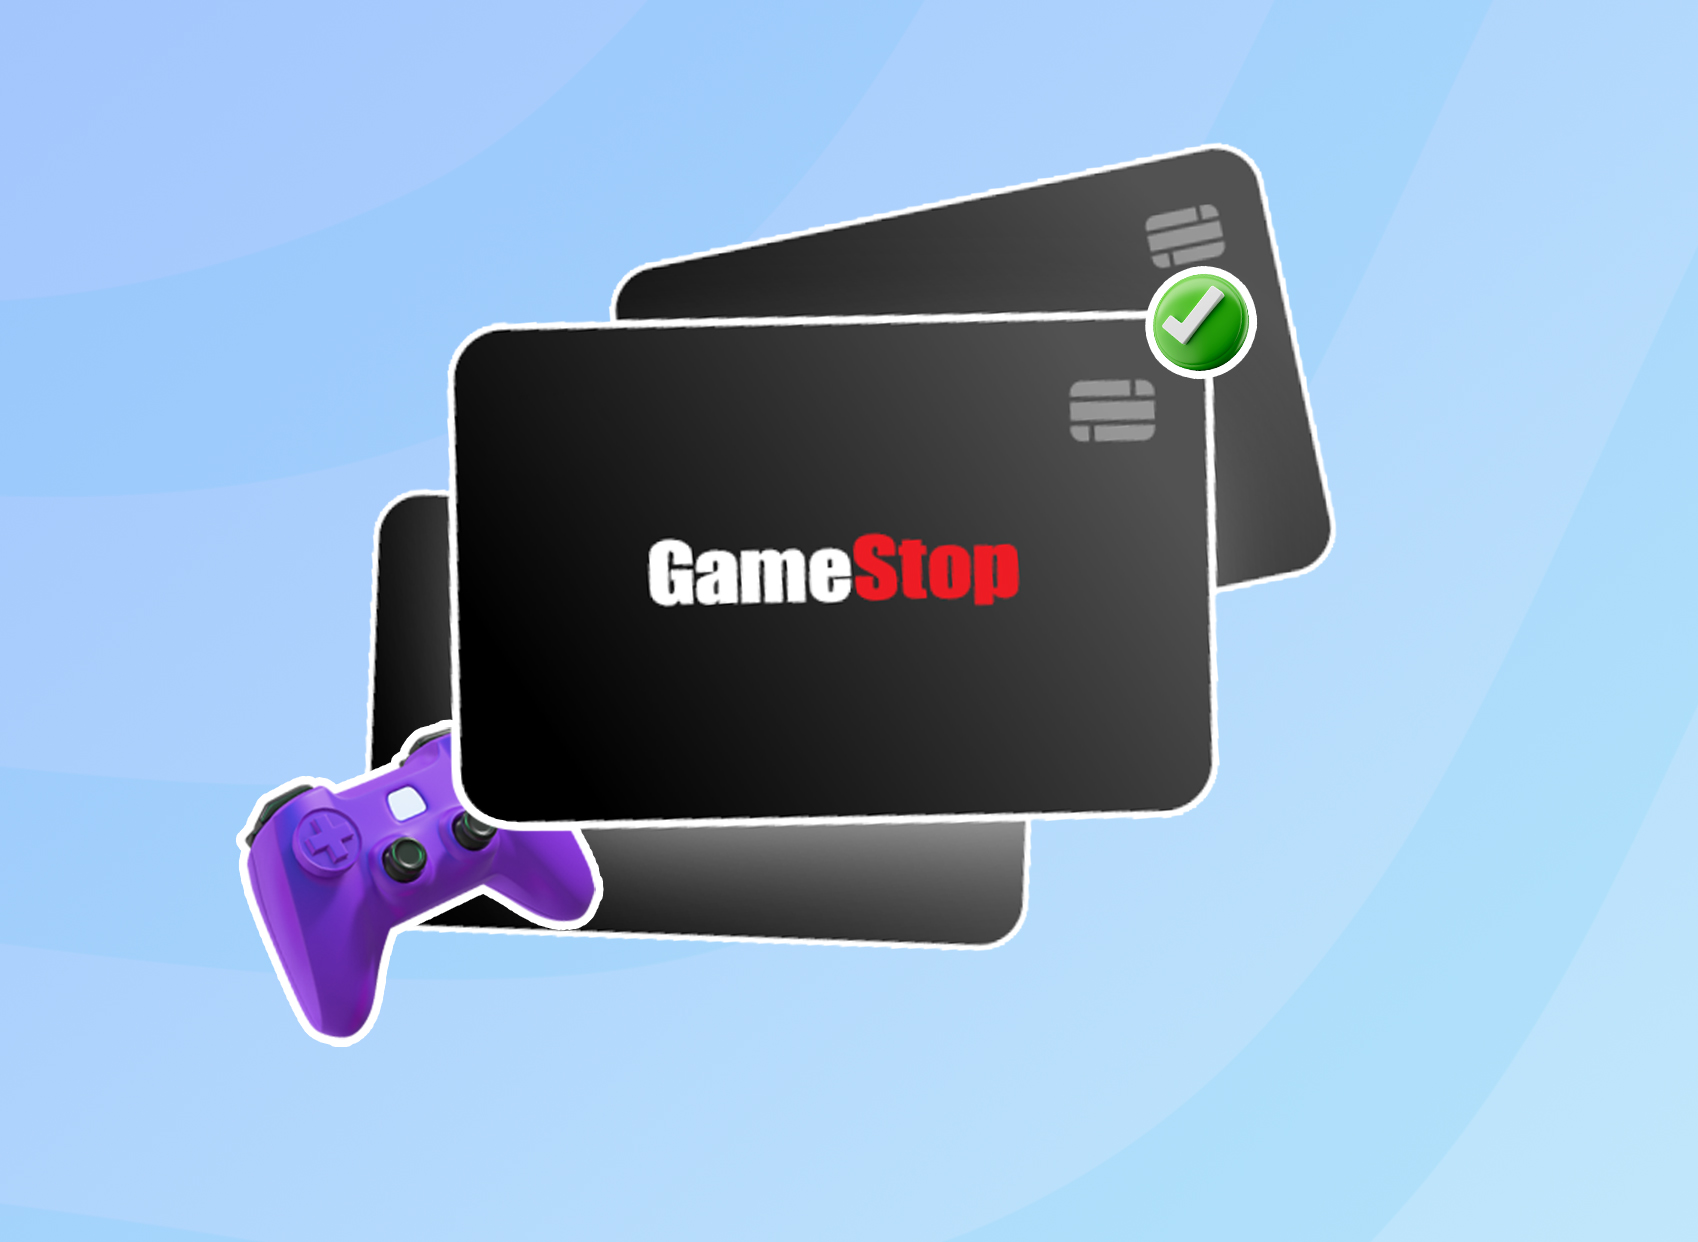 Target gift card shaped like a PlayStation controller. Gift card